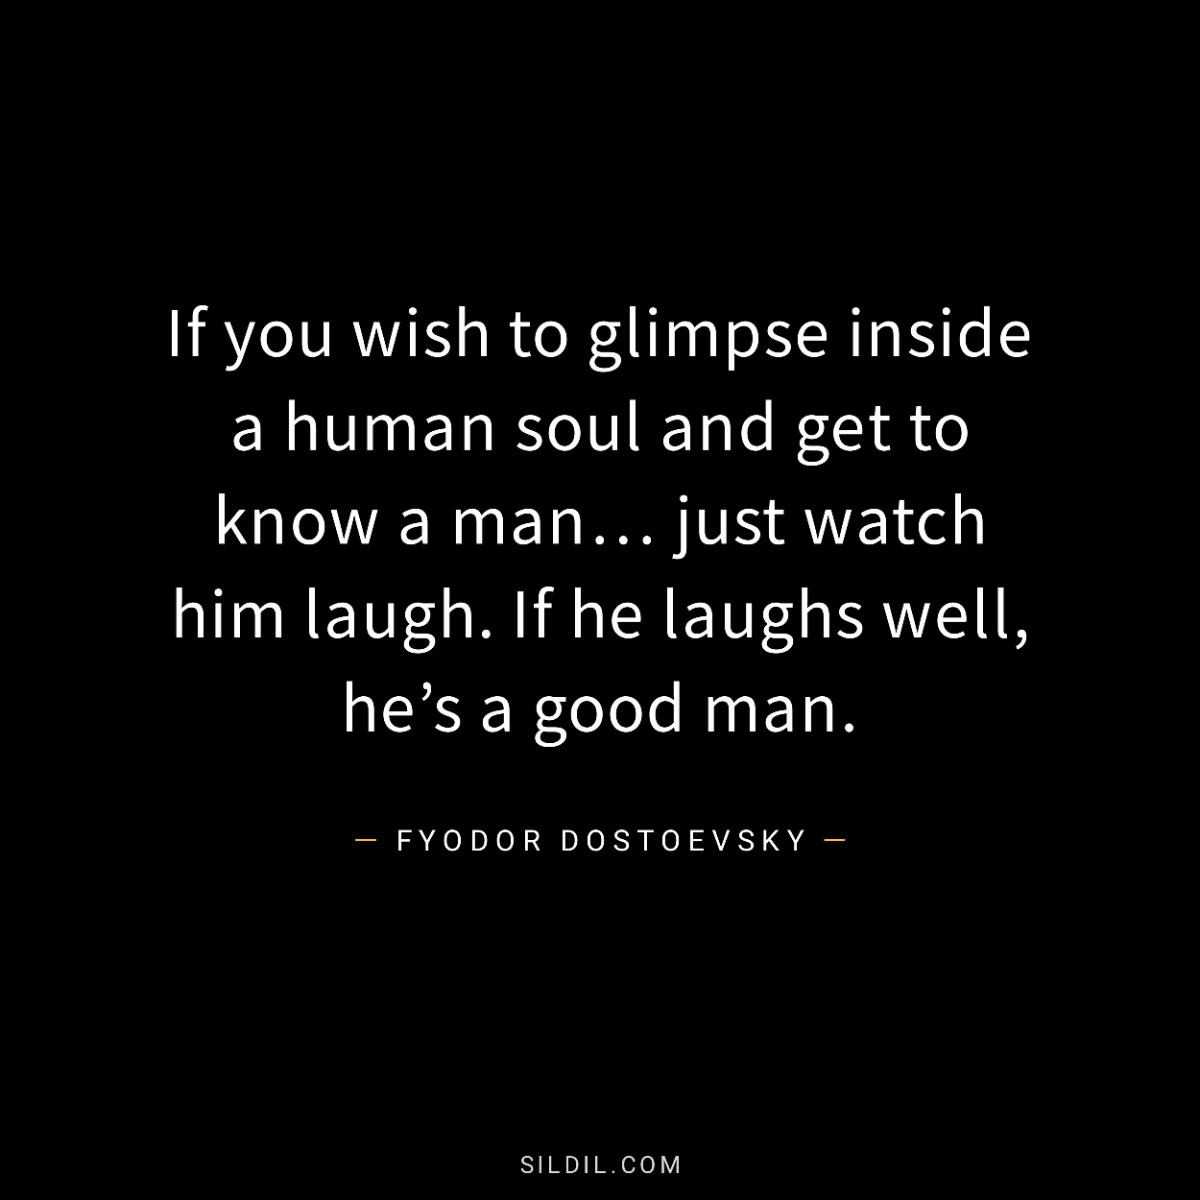 If you wish to glimpse inside a human soul and get to know a man… just watch him laugh. If he laughs well, he’s a good man.